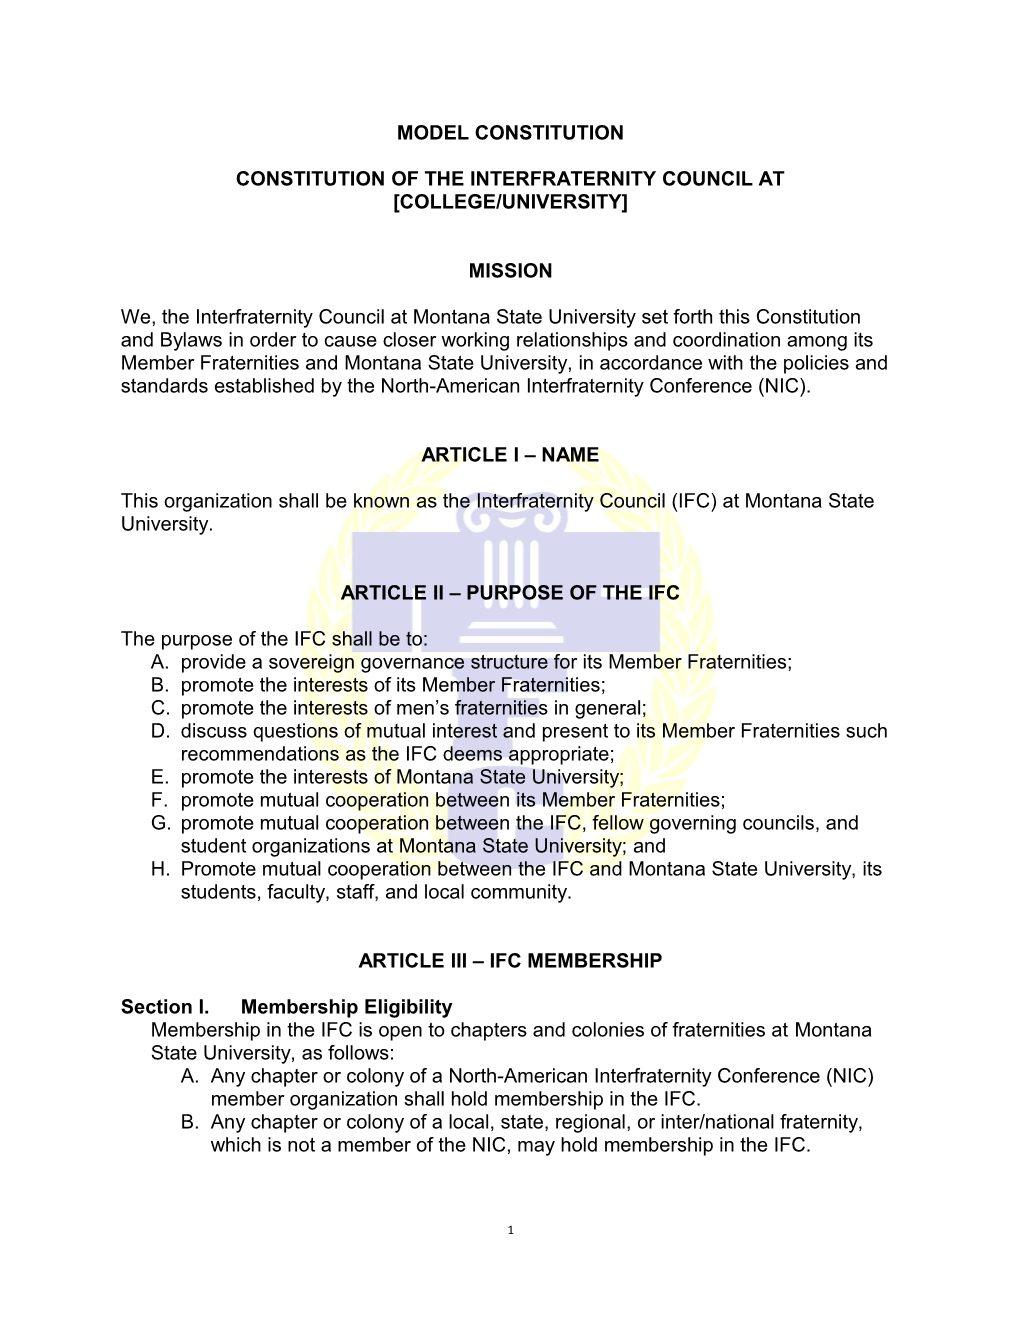 Constitution of the Interfraternity Council at College/University